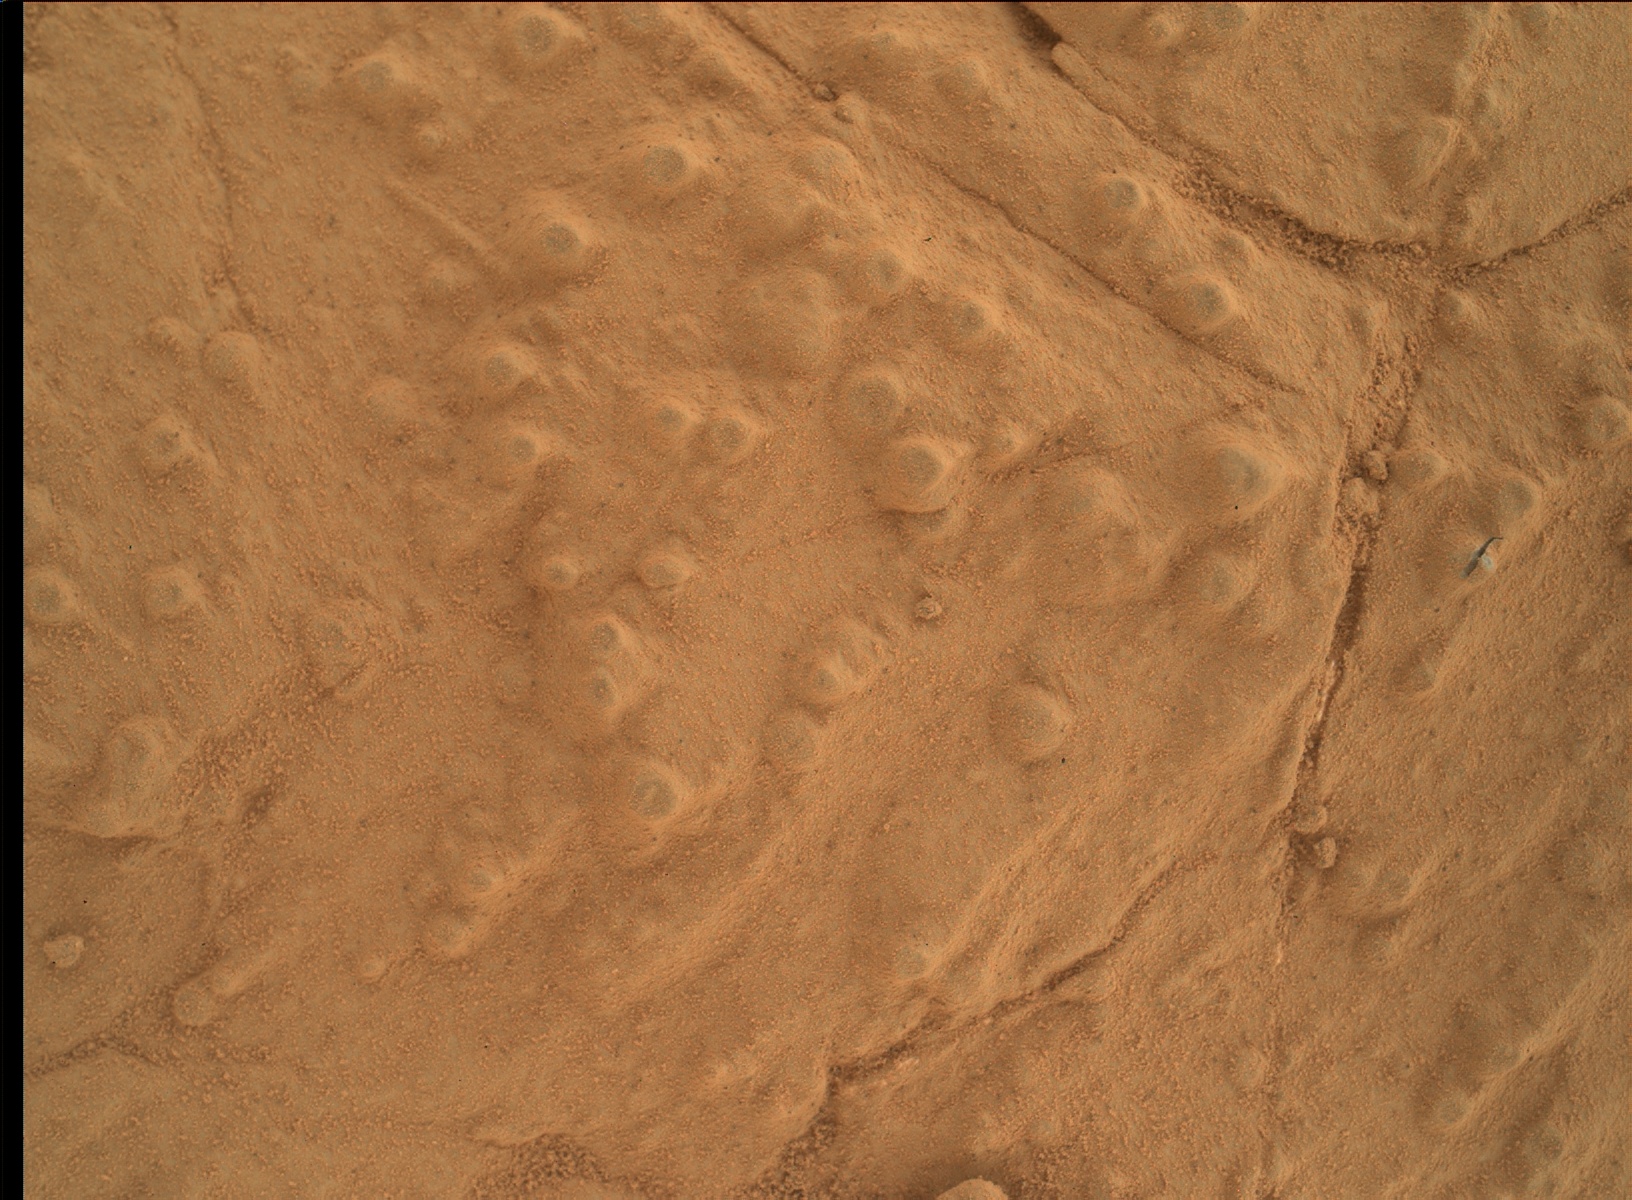 Nasa's Mars rover Curiosity acquired this image using its Mars Hand Lens Imager (MAHLI) on Sol 276